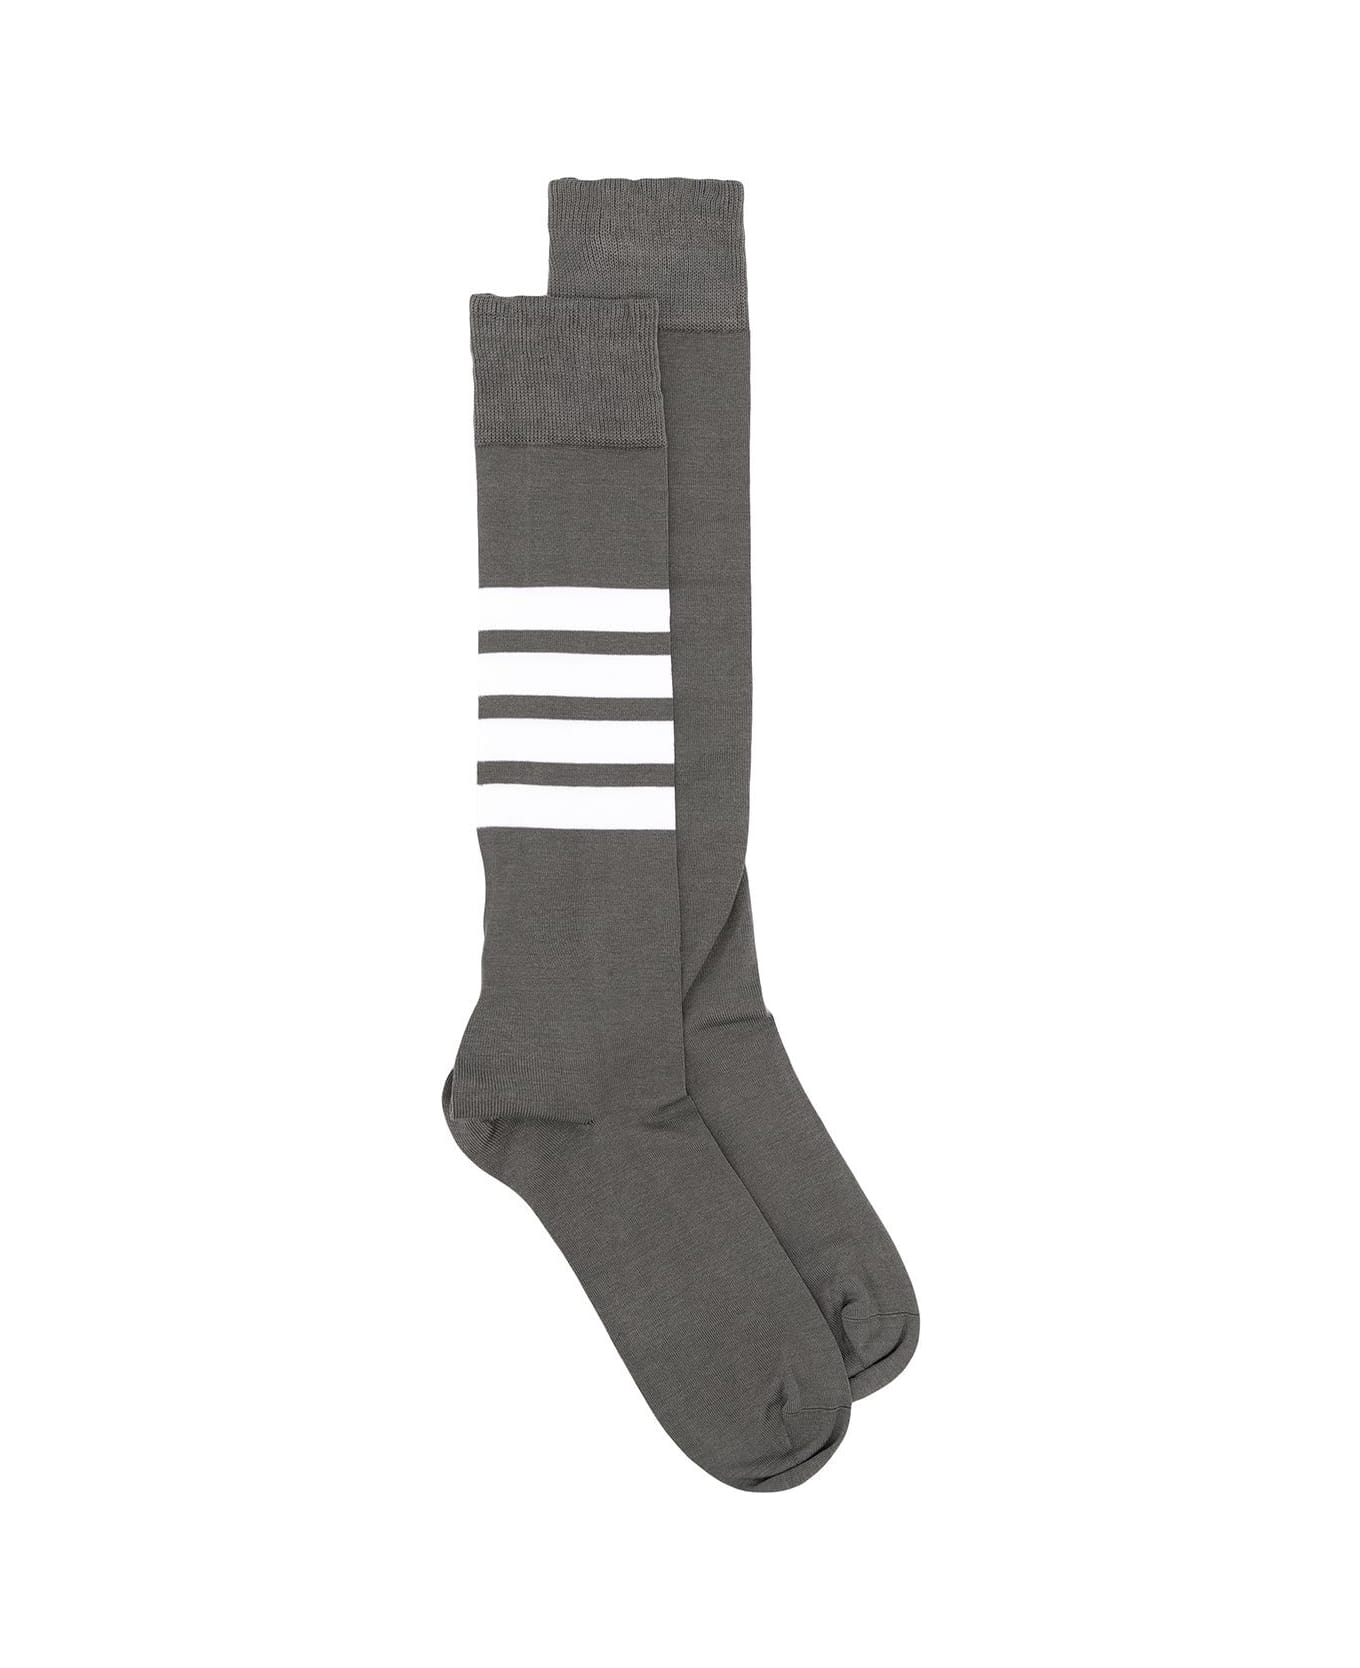 Thom Browne Over The Calf Socks With 4 Bar - Med Grey 靴下＆タイツ